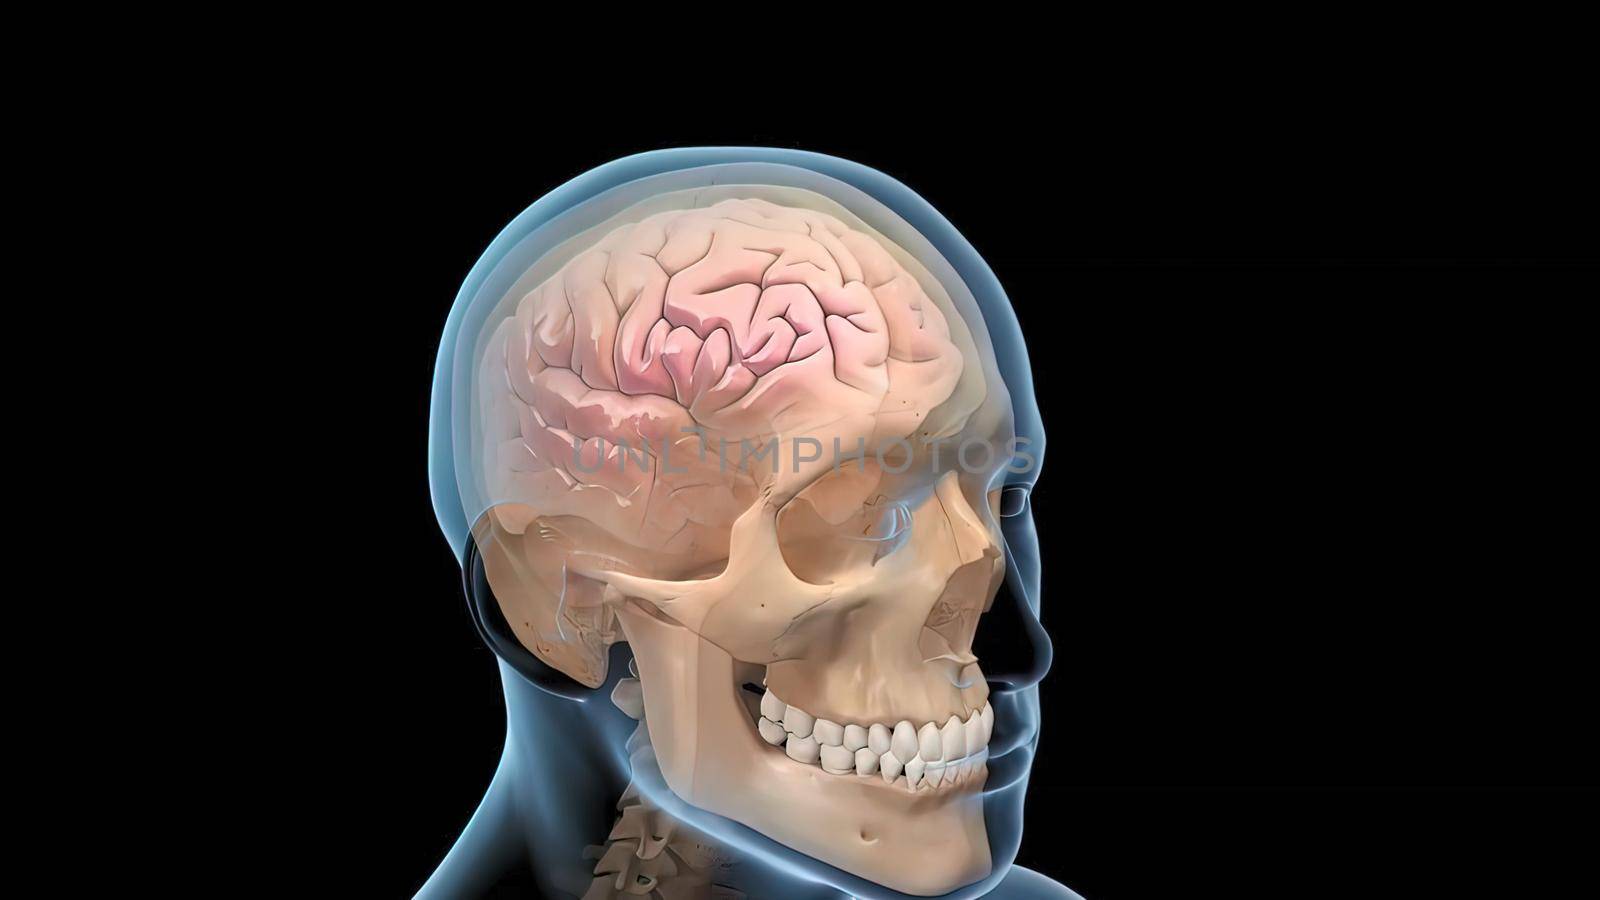 Medical 3D illustration of human brain by creativepic